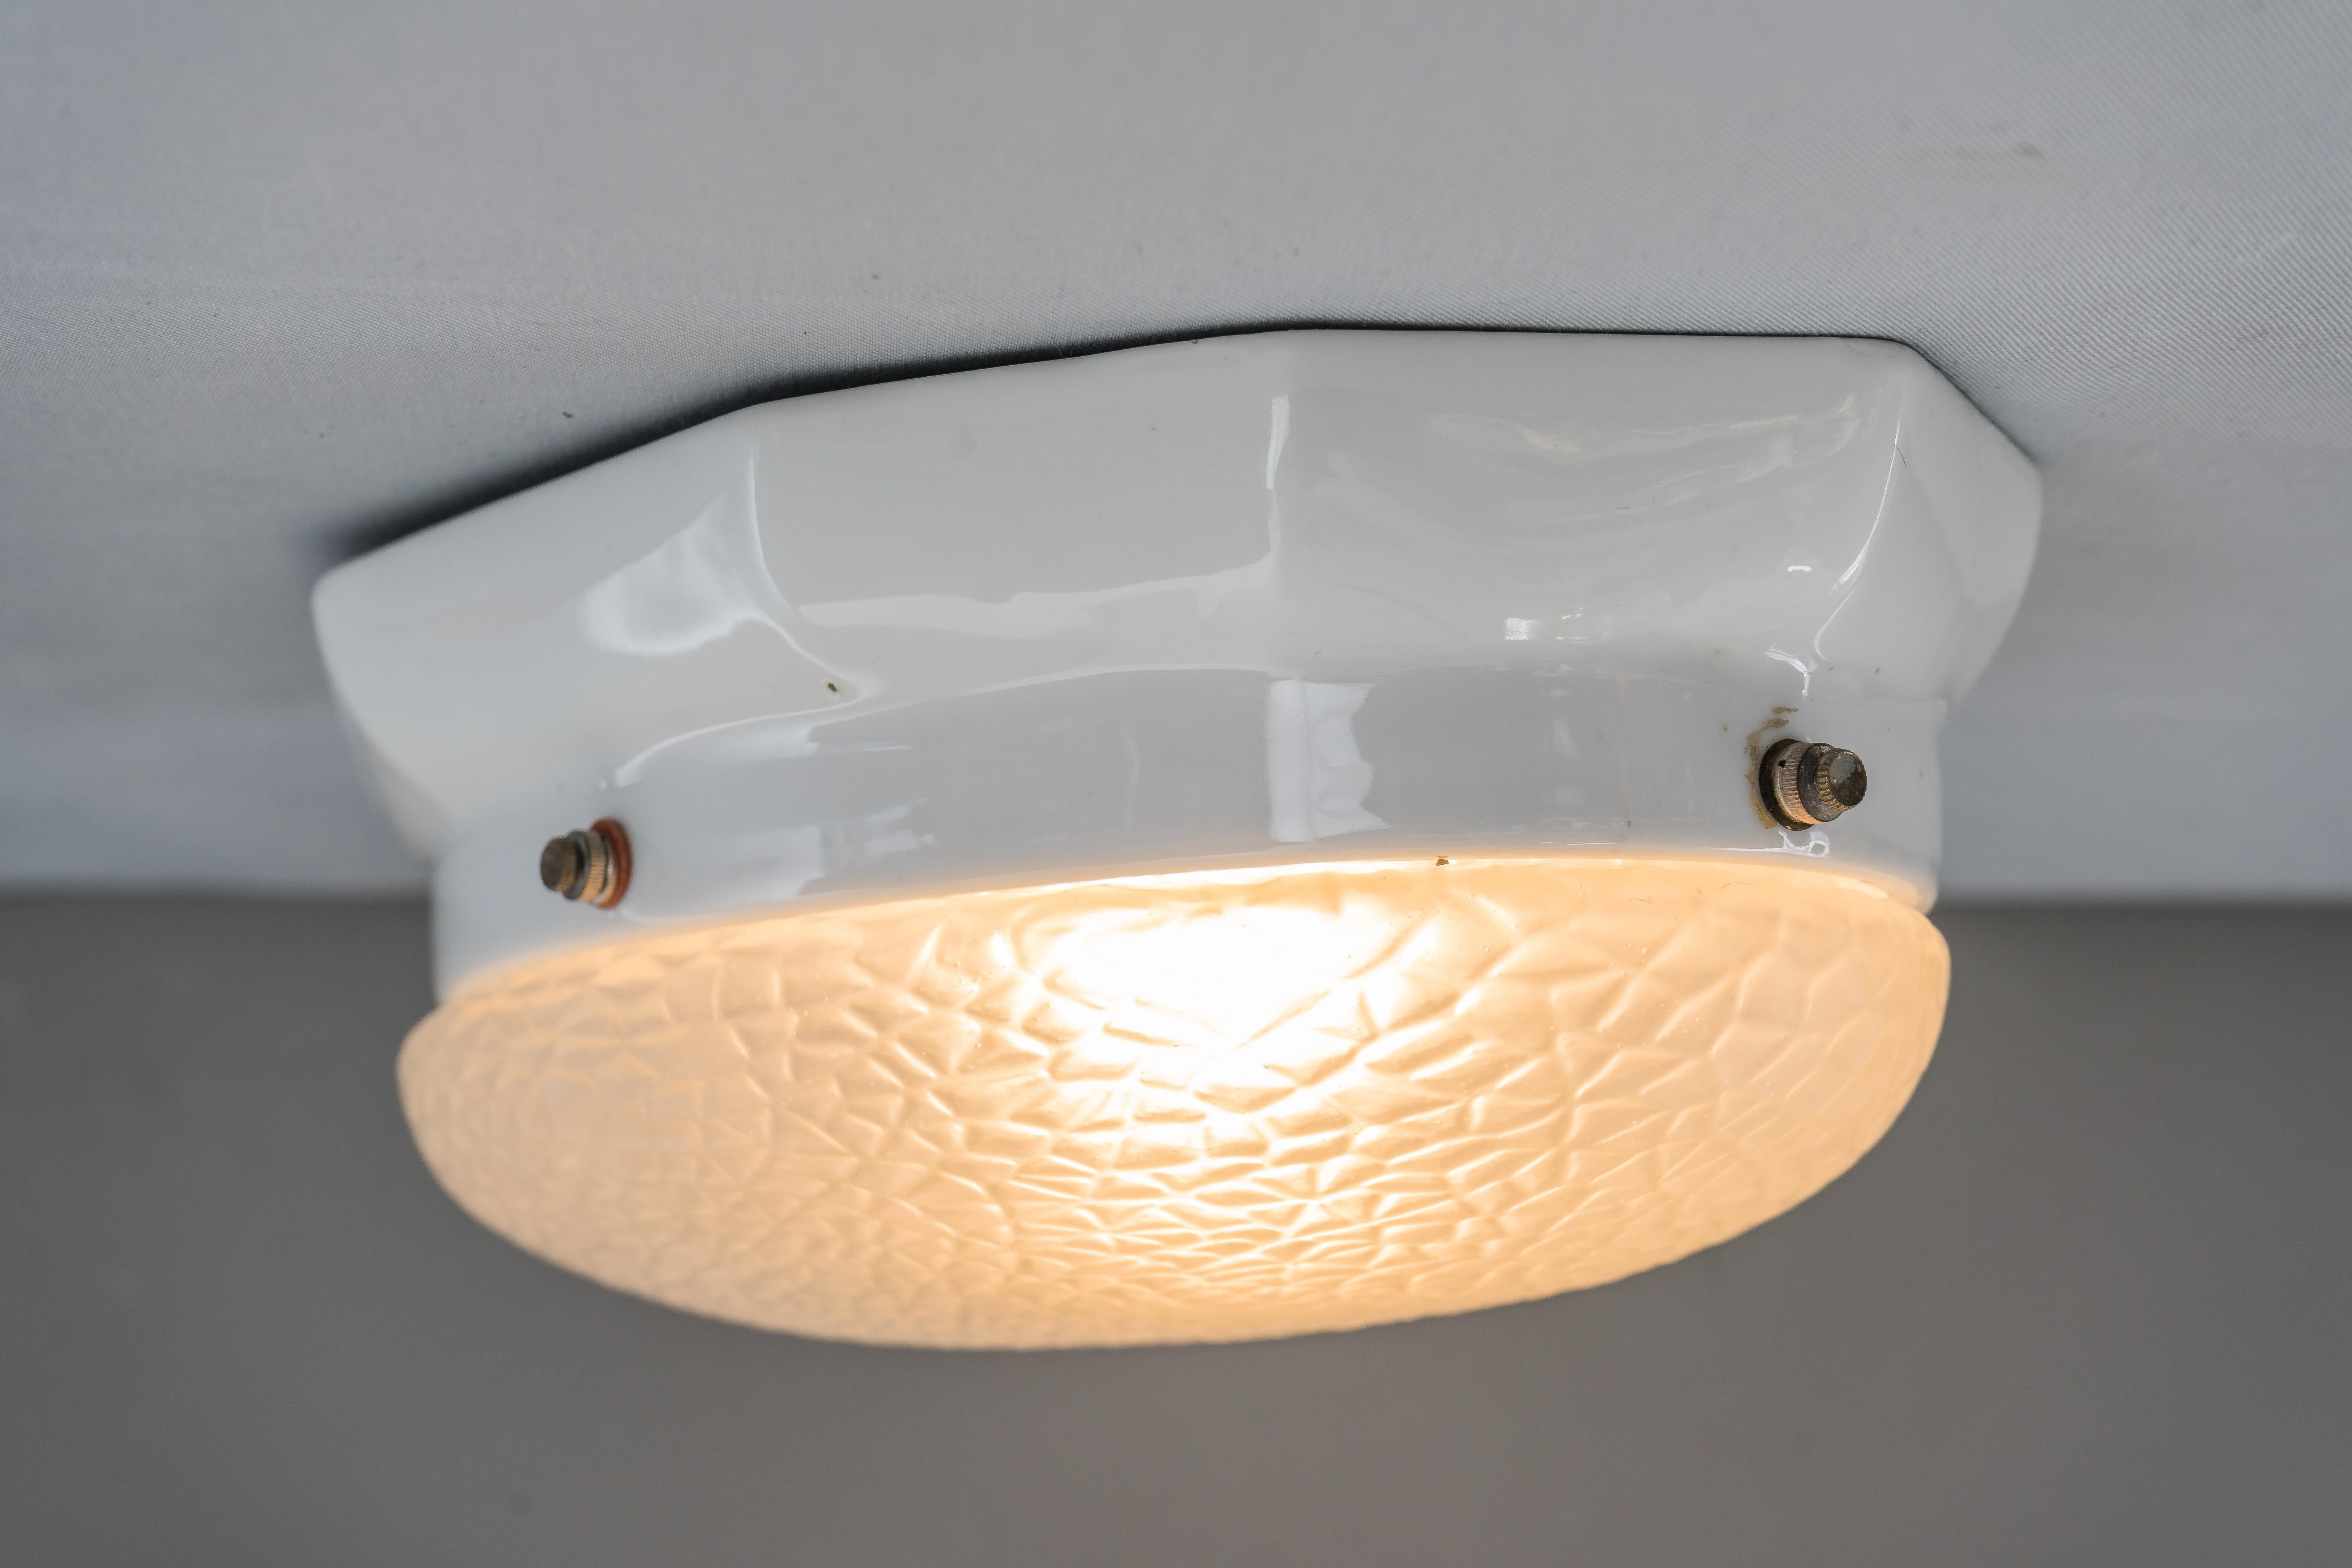 White Oval Porcelain Wall or Ceiling Lamp with Original Glass Shade, circa 1920s For Sale 8